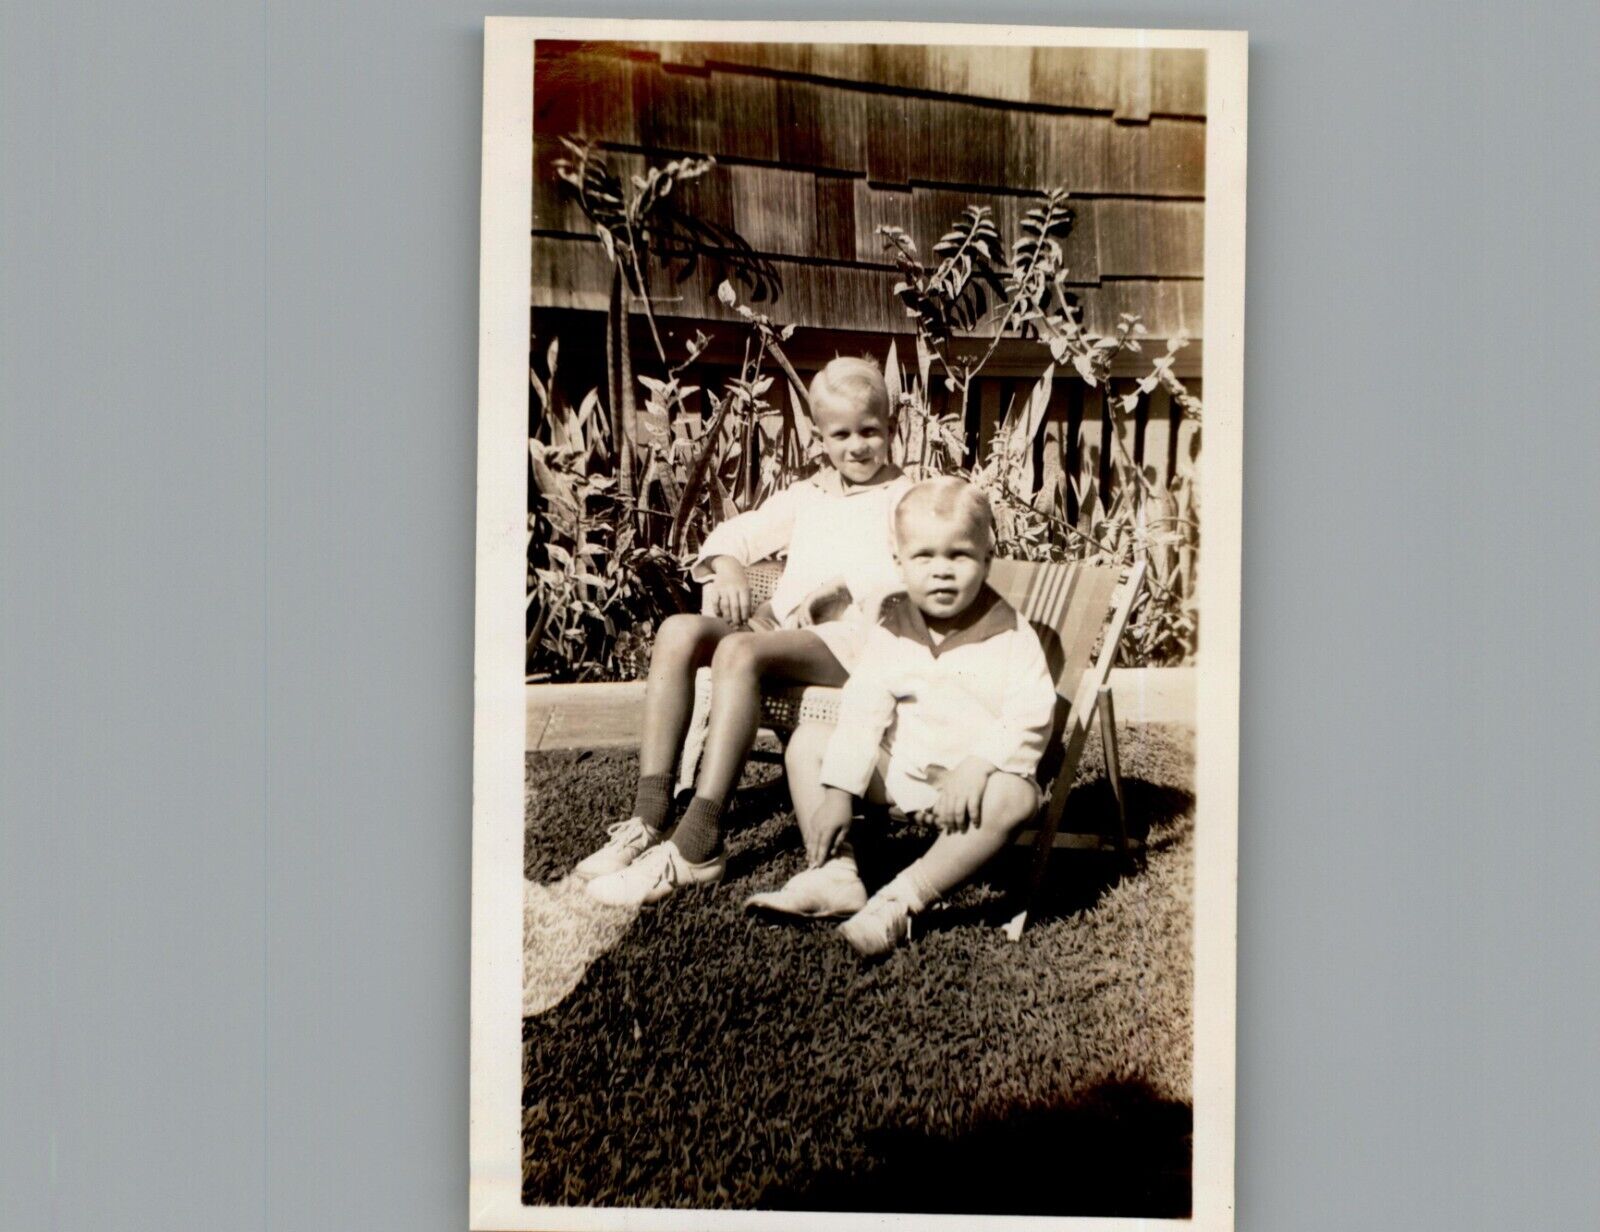 Antique 1940's Hanging out in the Sun Black & White Photography Photo